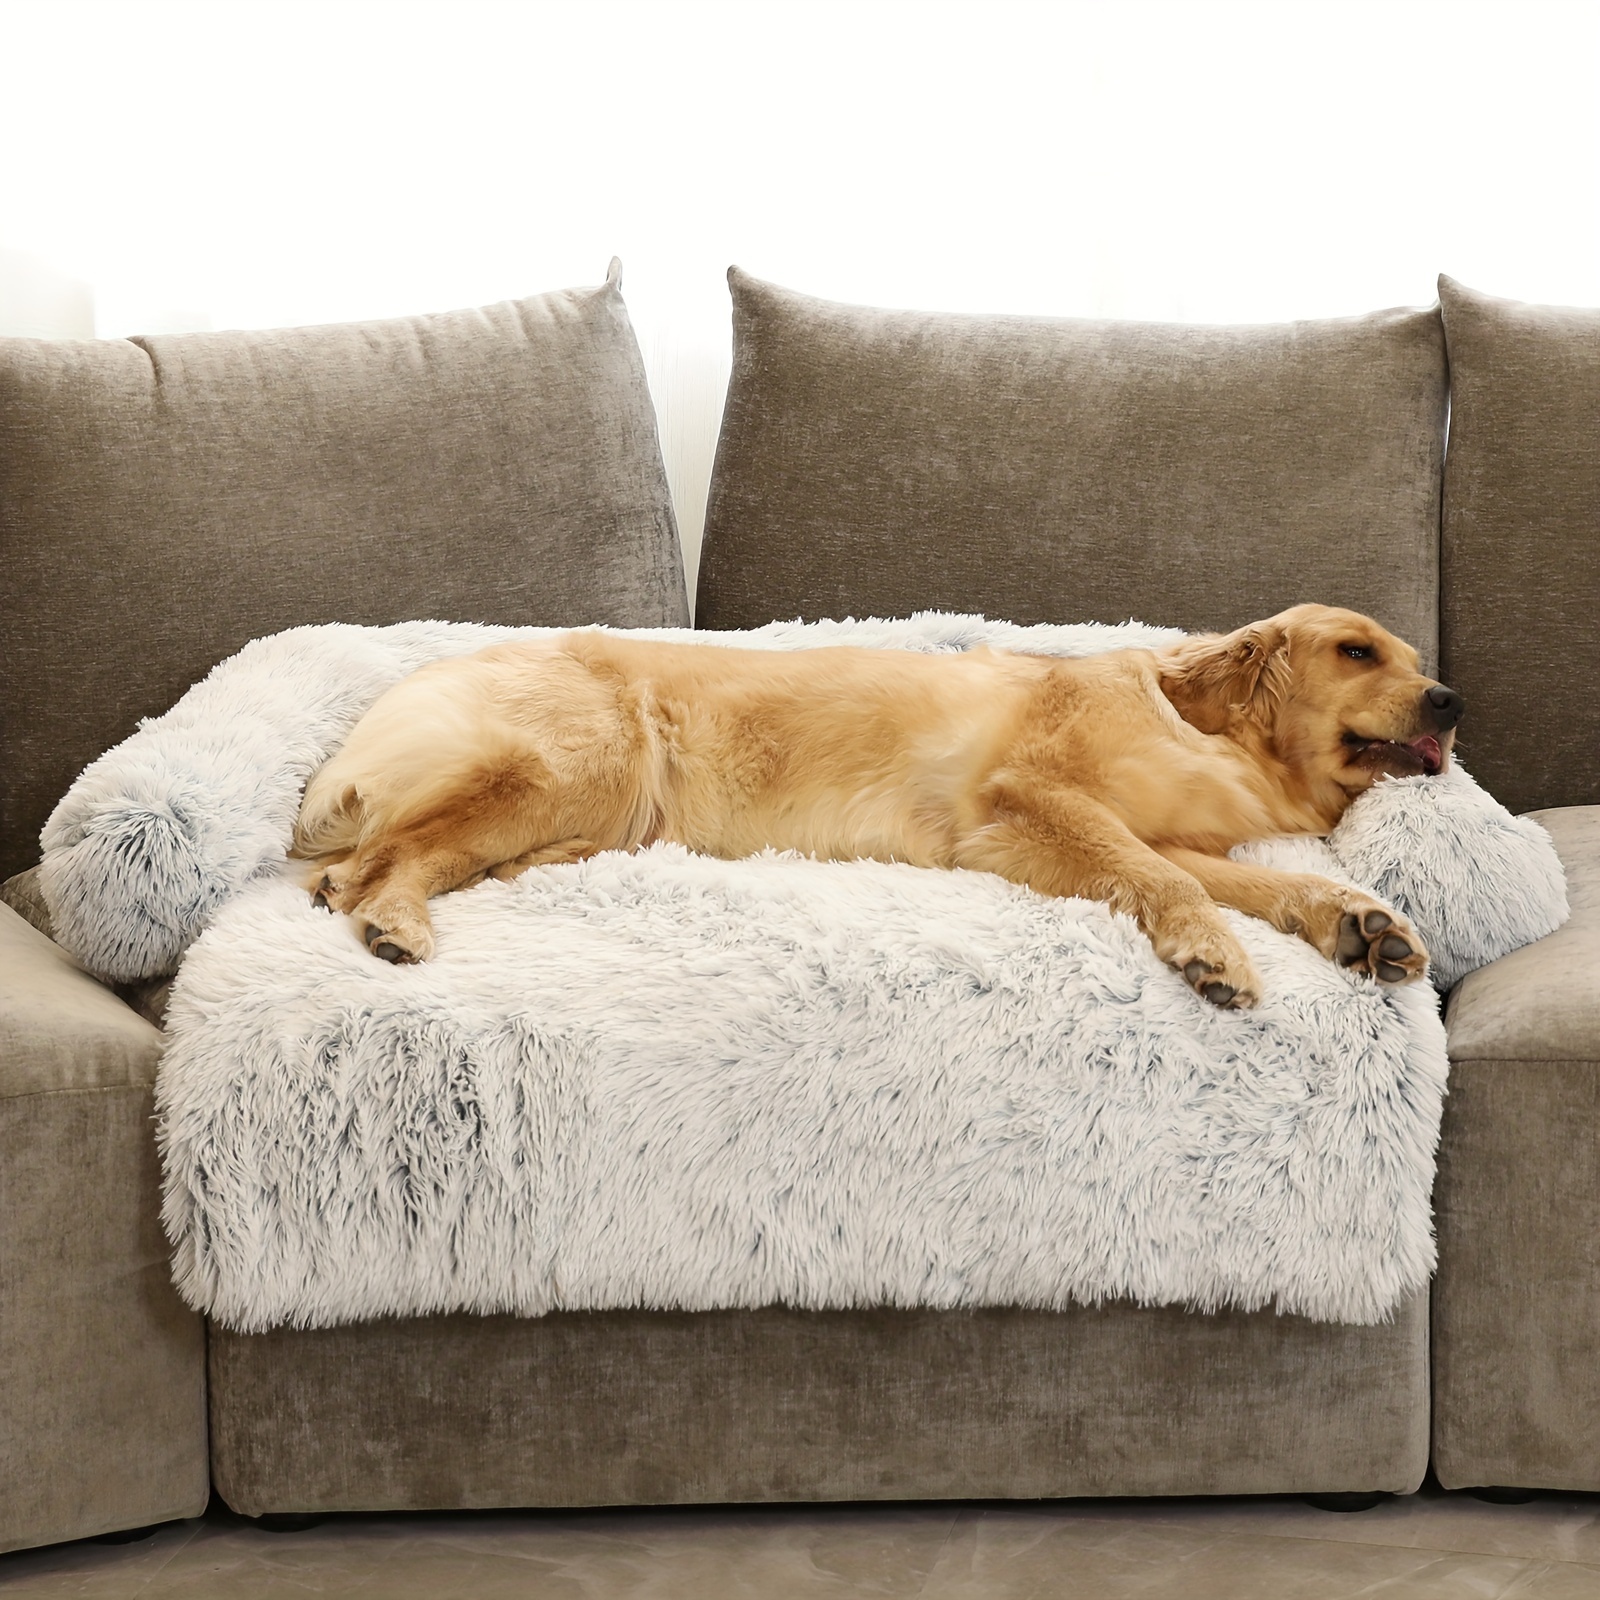 

Calming Dog Beds For Extra Large Dogs Fluffy Plush Couch Cover For Dogs With Removable Washable Cover For Furniture Protector